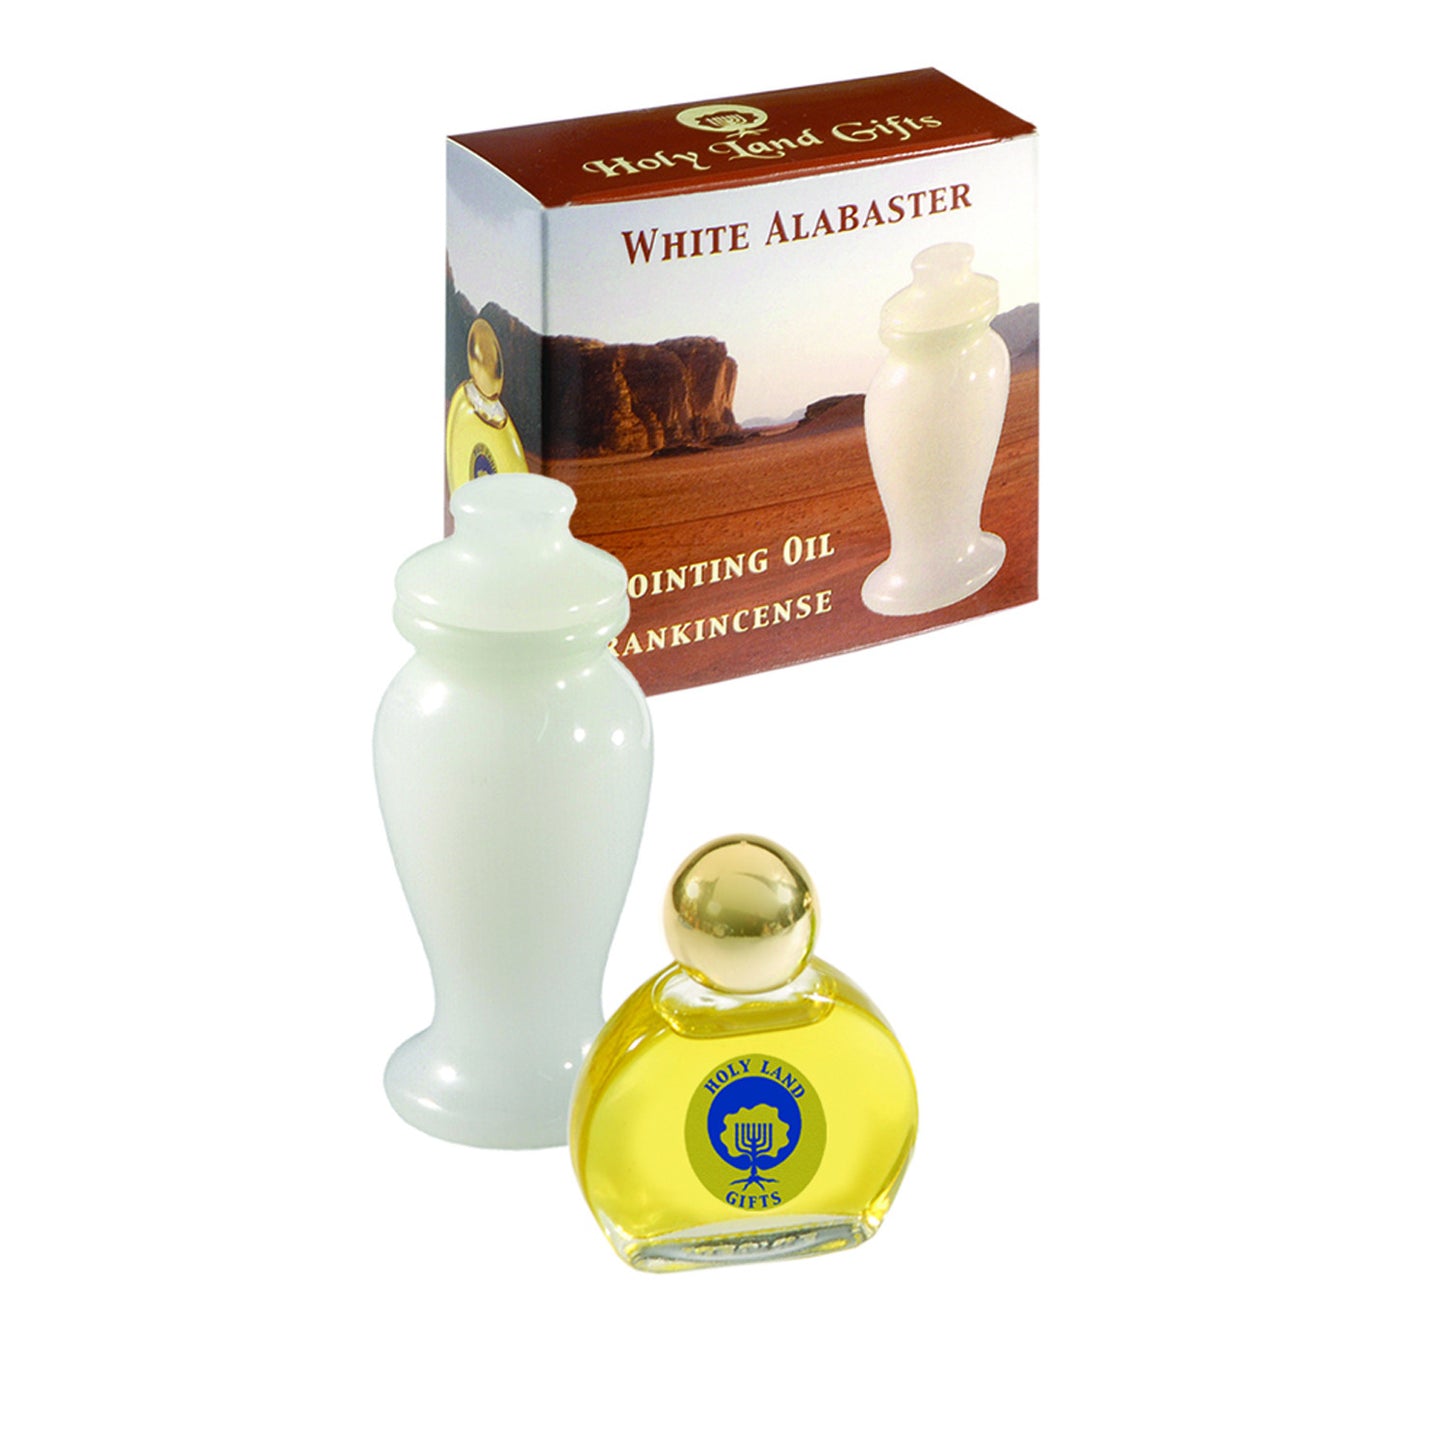 Anointing Oil with White Alabaster Flask - Holy Land Gifts